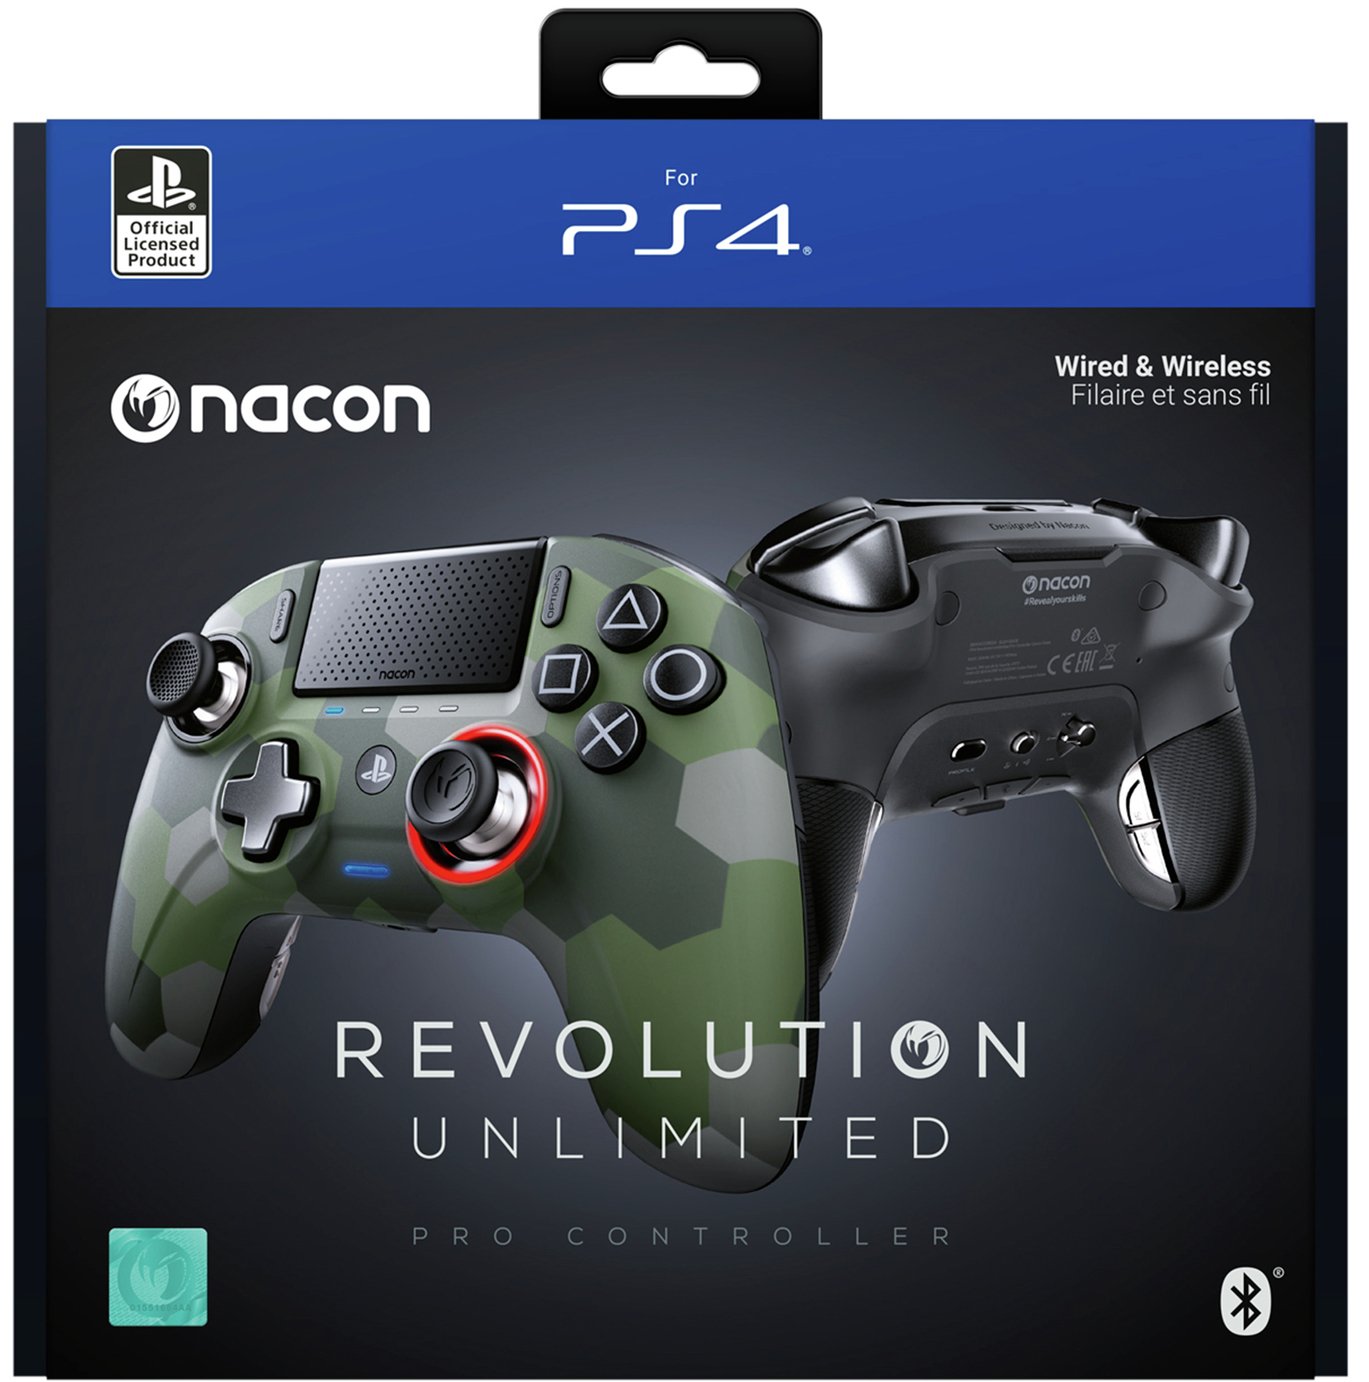 Argos Nacon Ps4 Cheaper Than Retail Price Buy Clothing Accessories And Lifestyle Products For Women Men